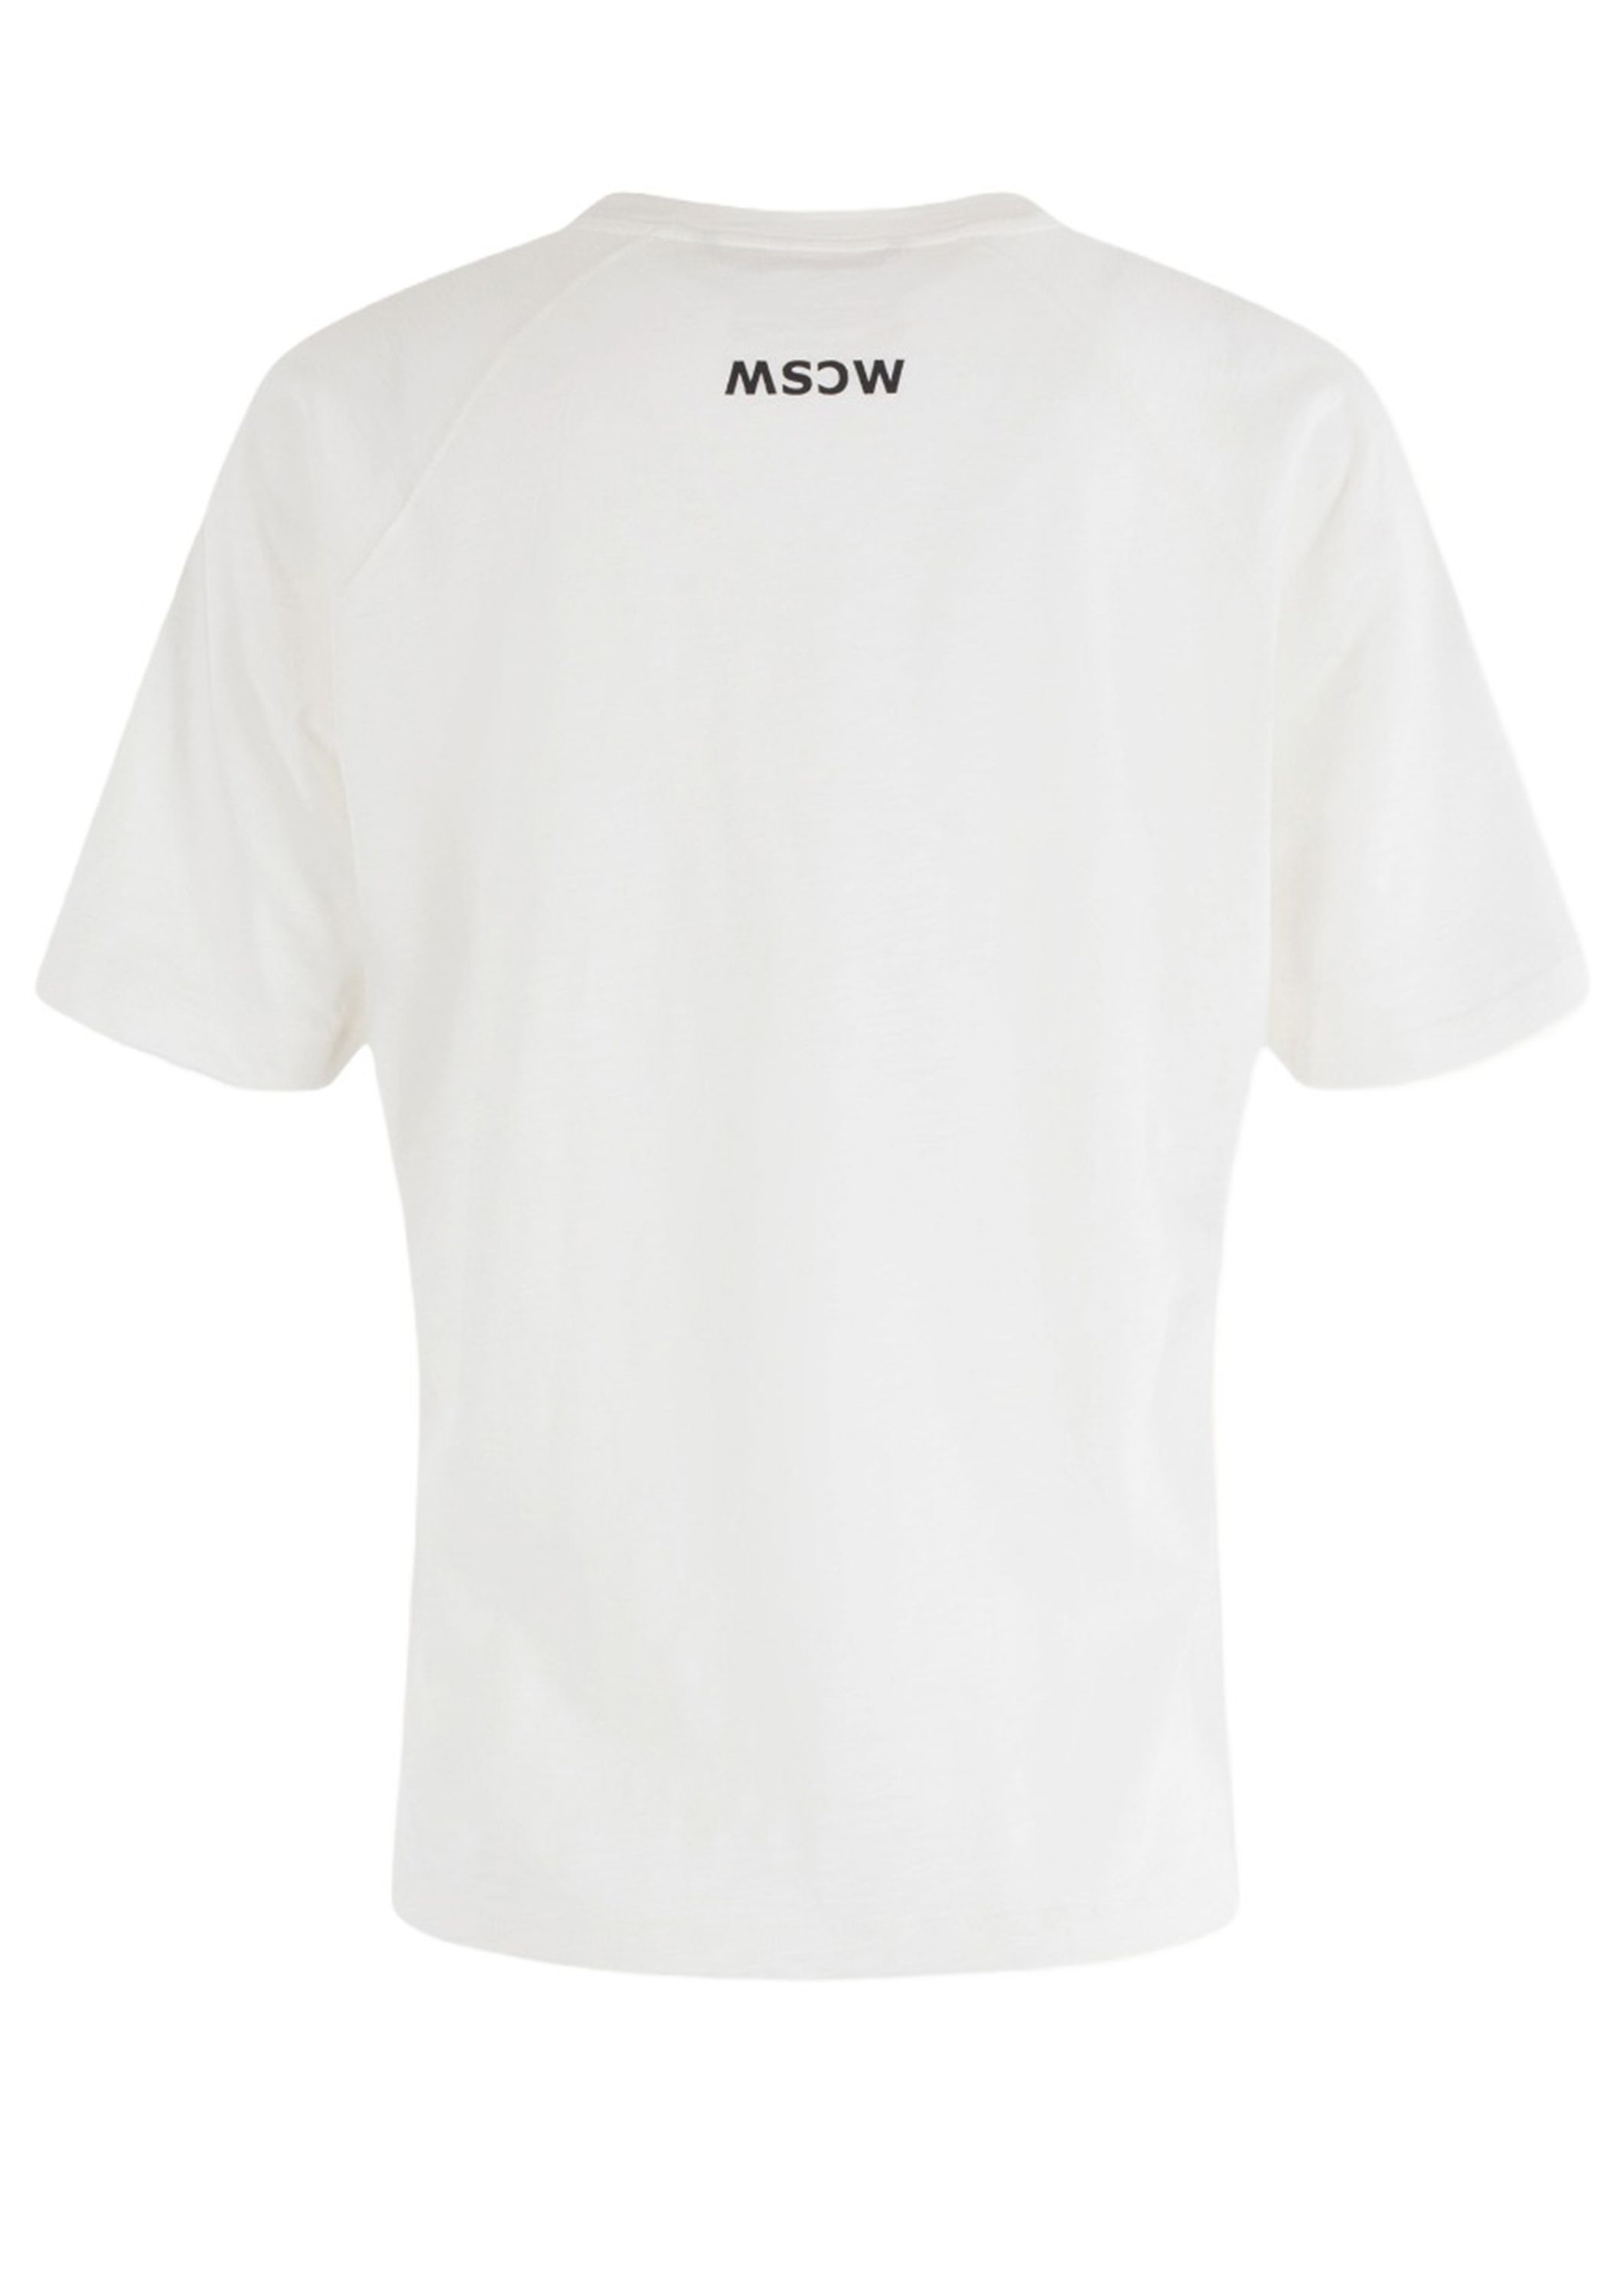 MOSCOW SHIRT